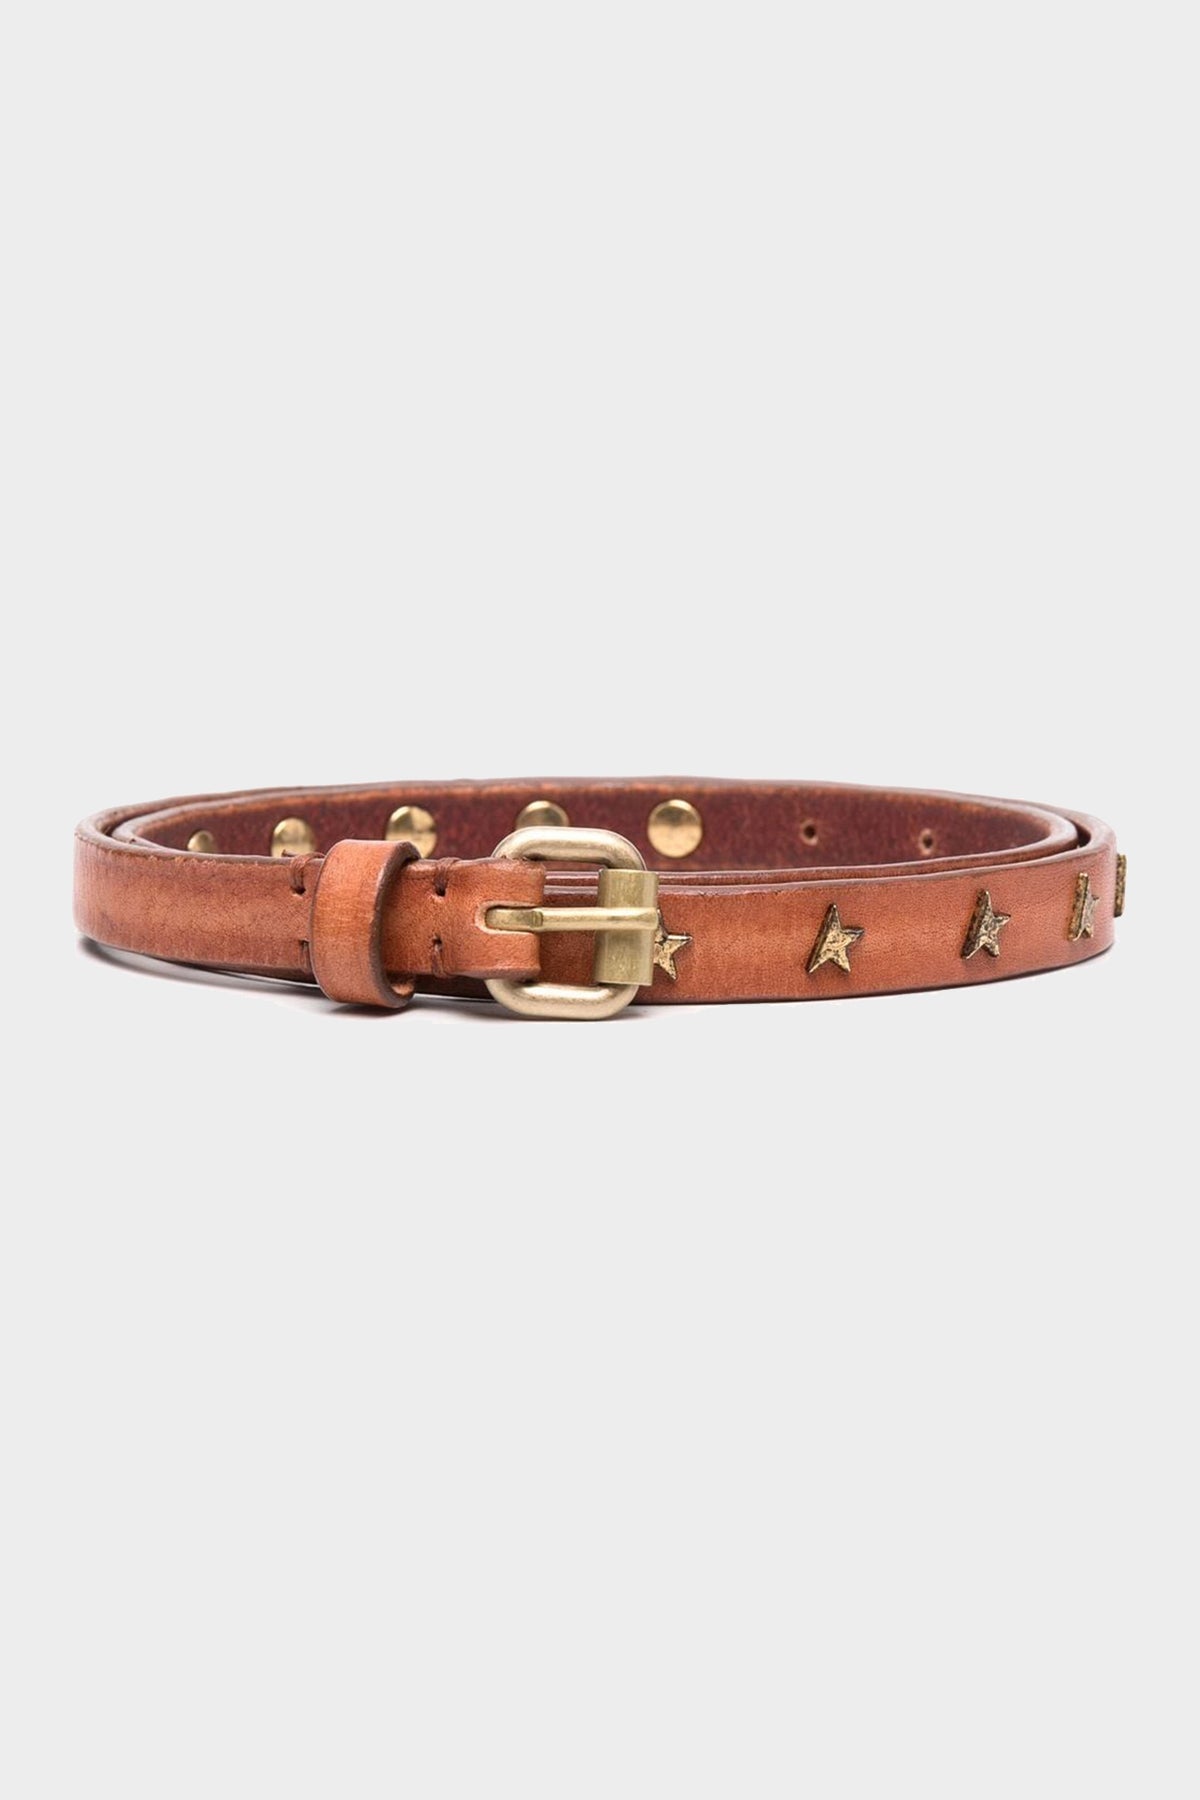 Molly Light Brown Leather Belt with Star-Shaped Studs - shop-olivia.com